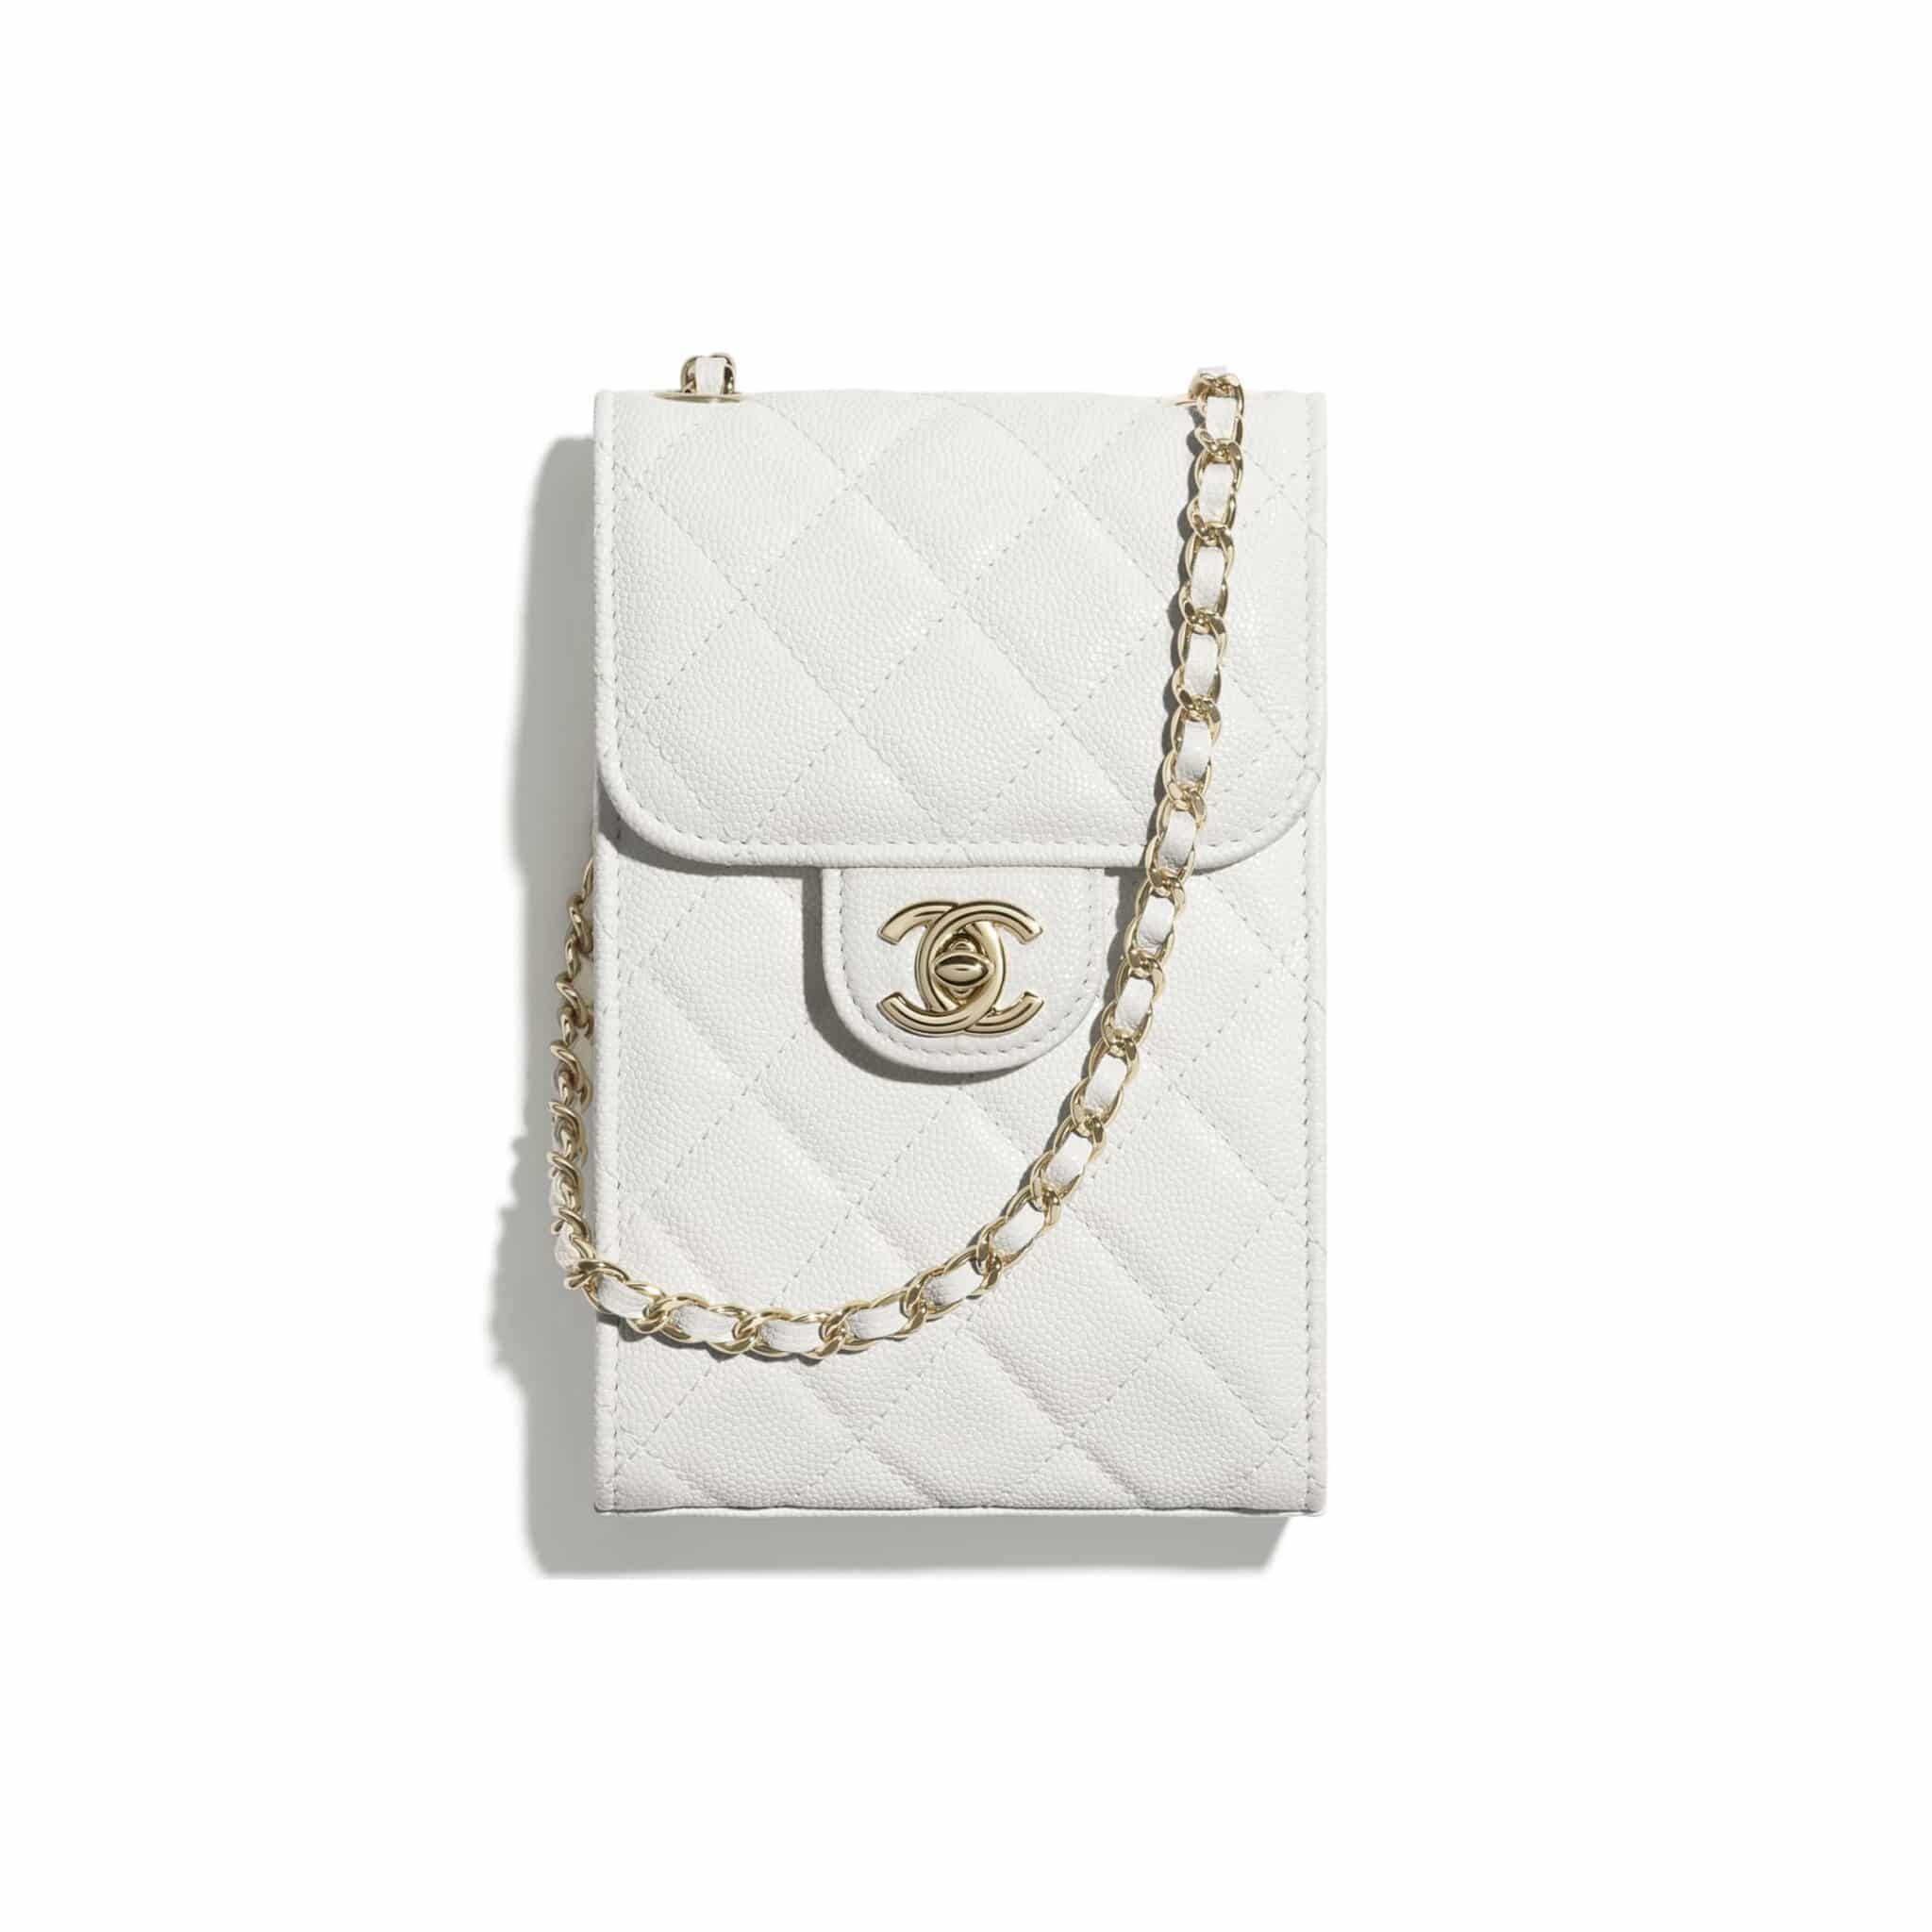 Chanel Shiny Calfskin Handbags and Small Leather Goods - Spotted Fashion